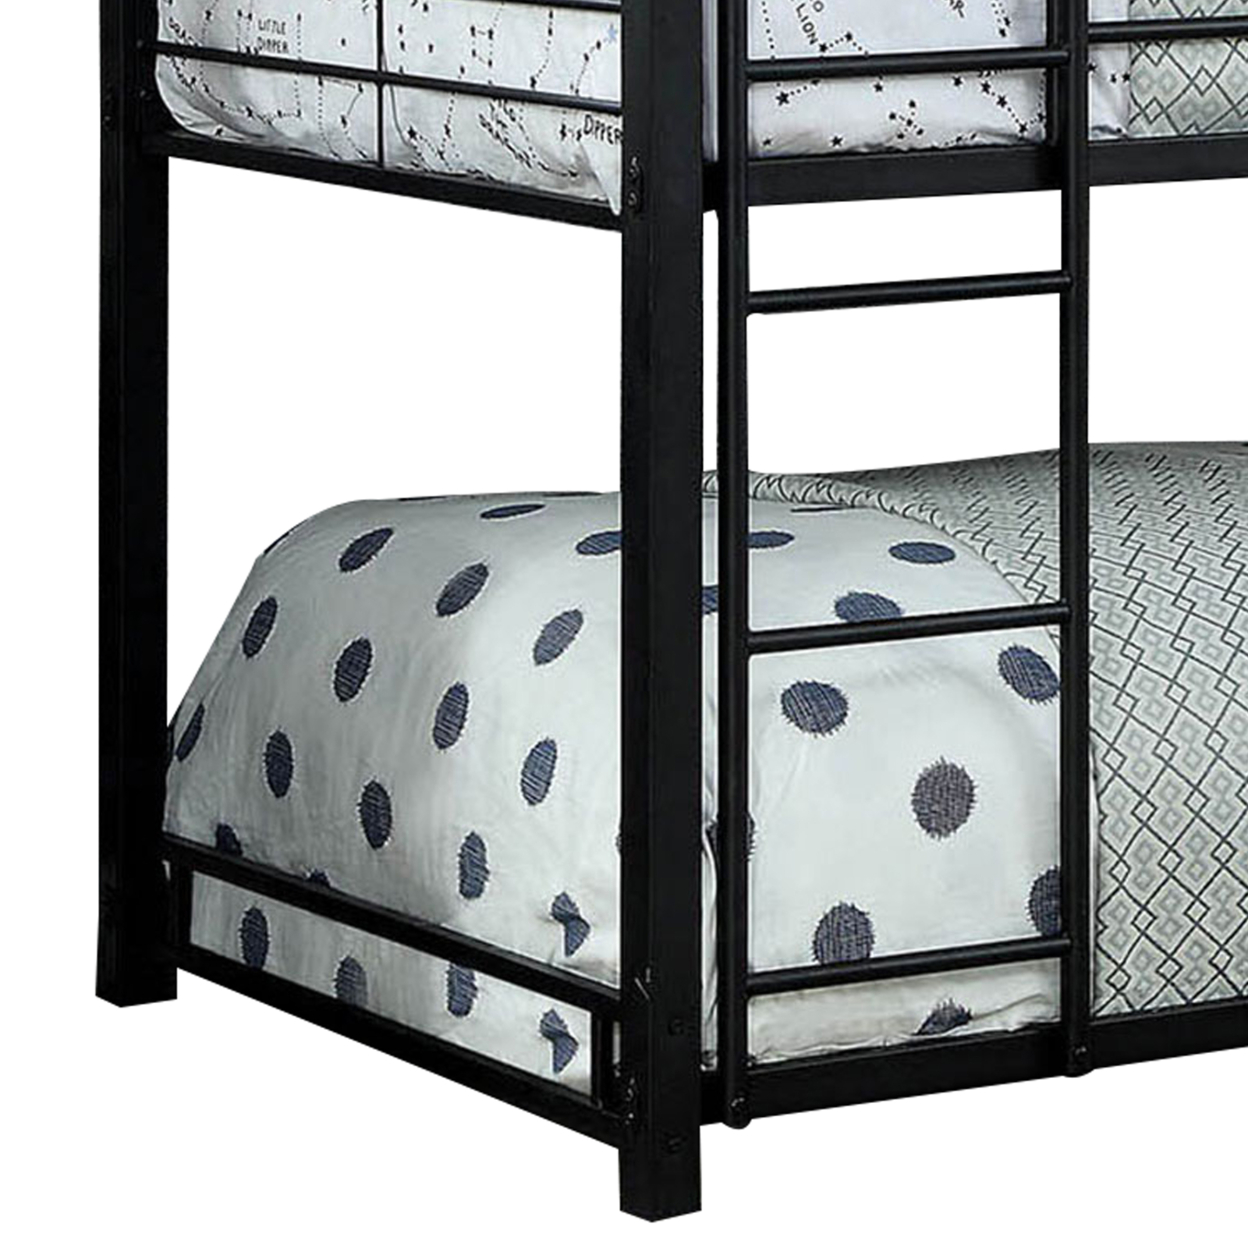 3 Tier Bunk Bed With Attached Ladders, Black- Saltoro Sherpi